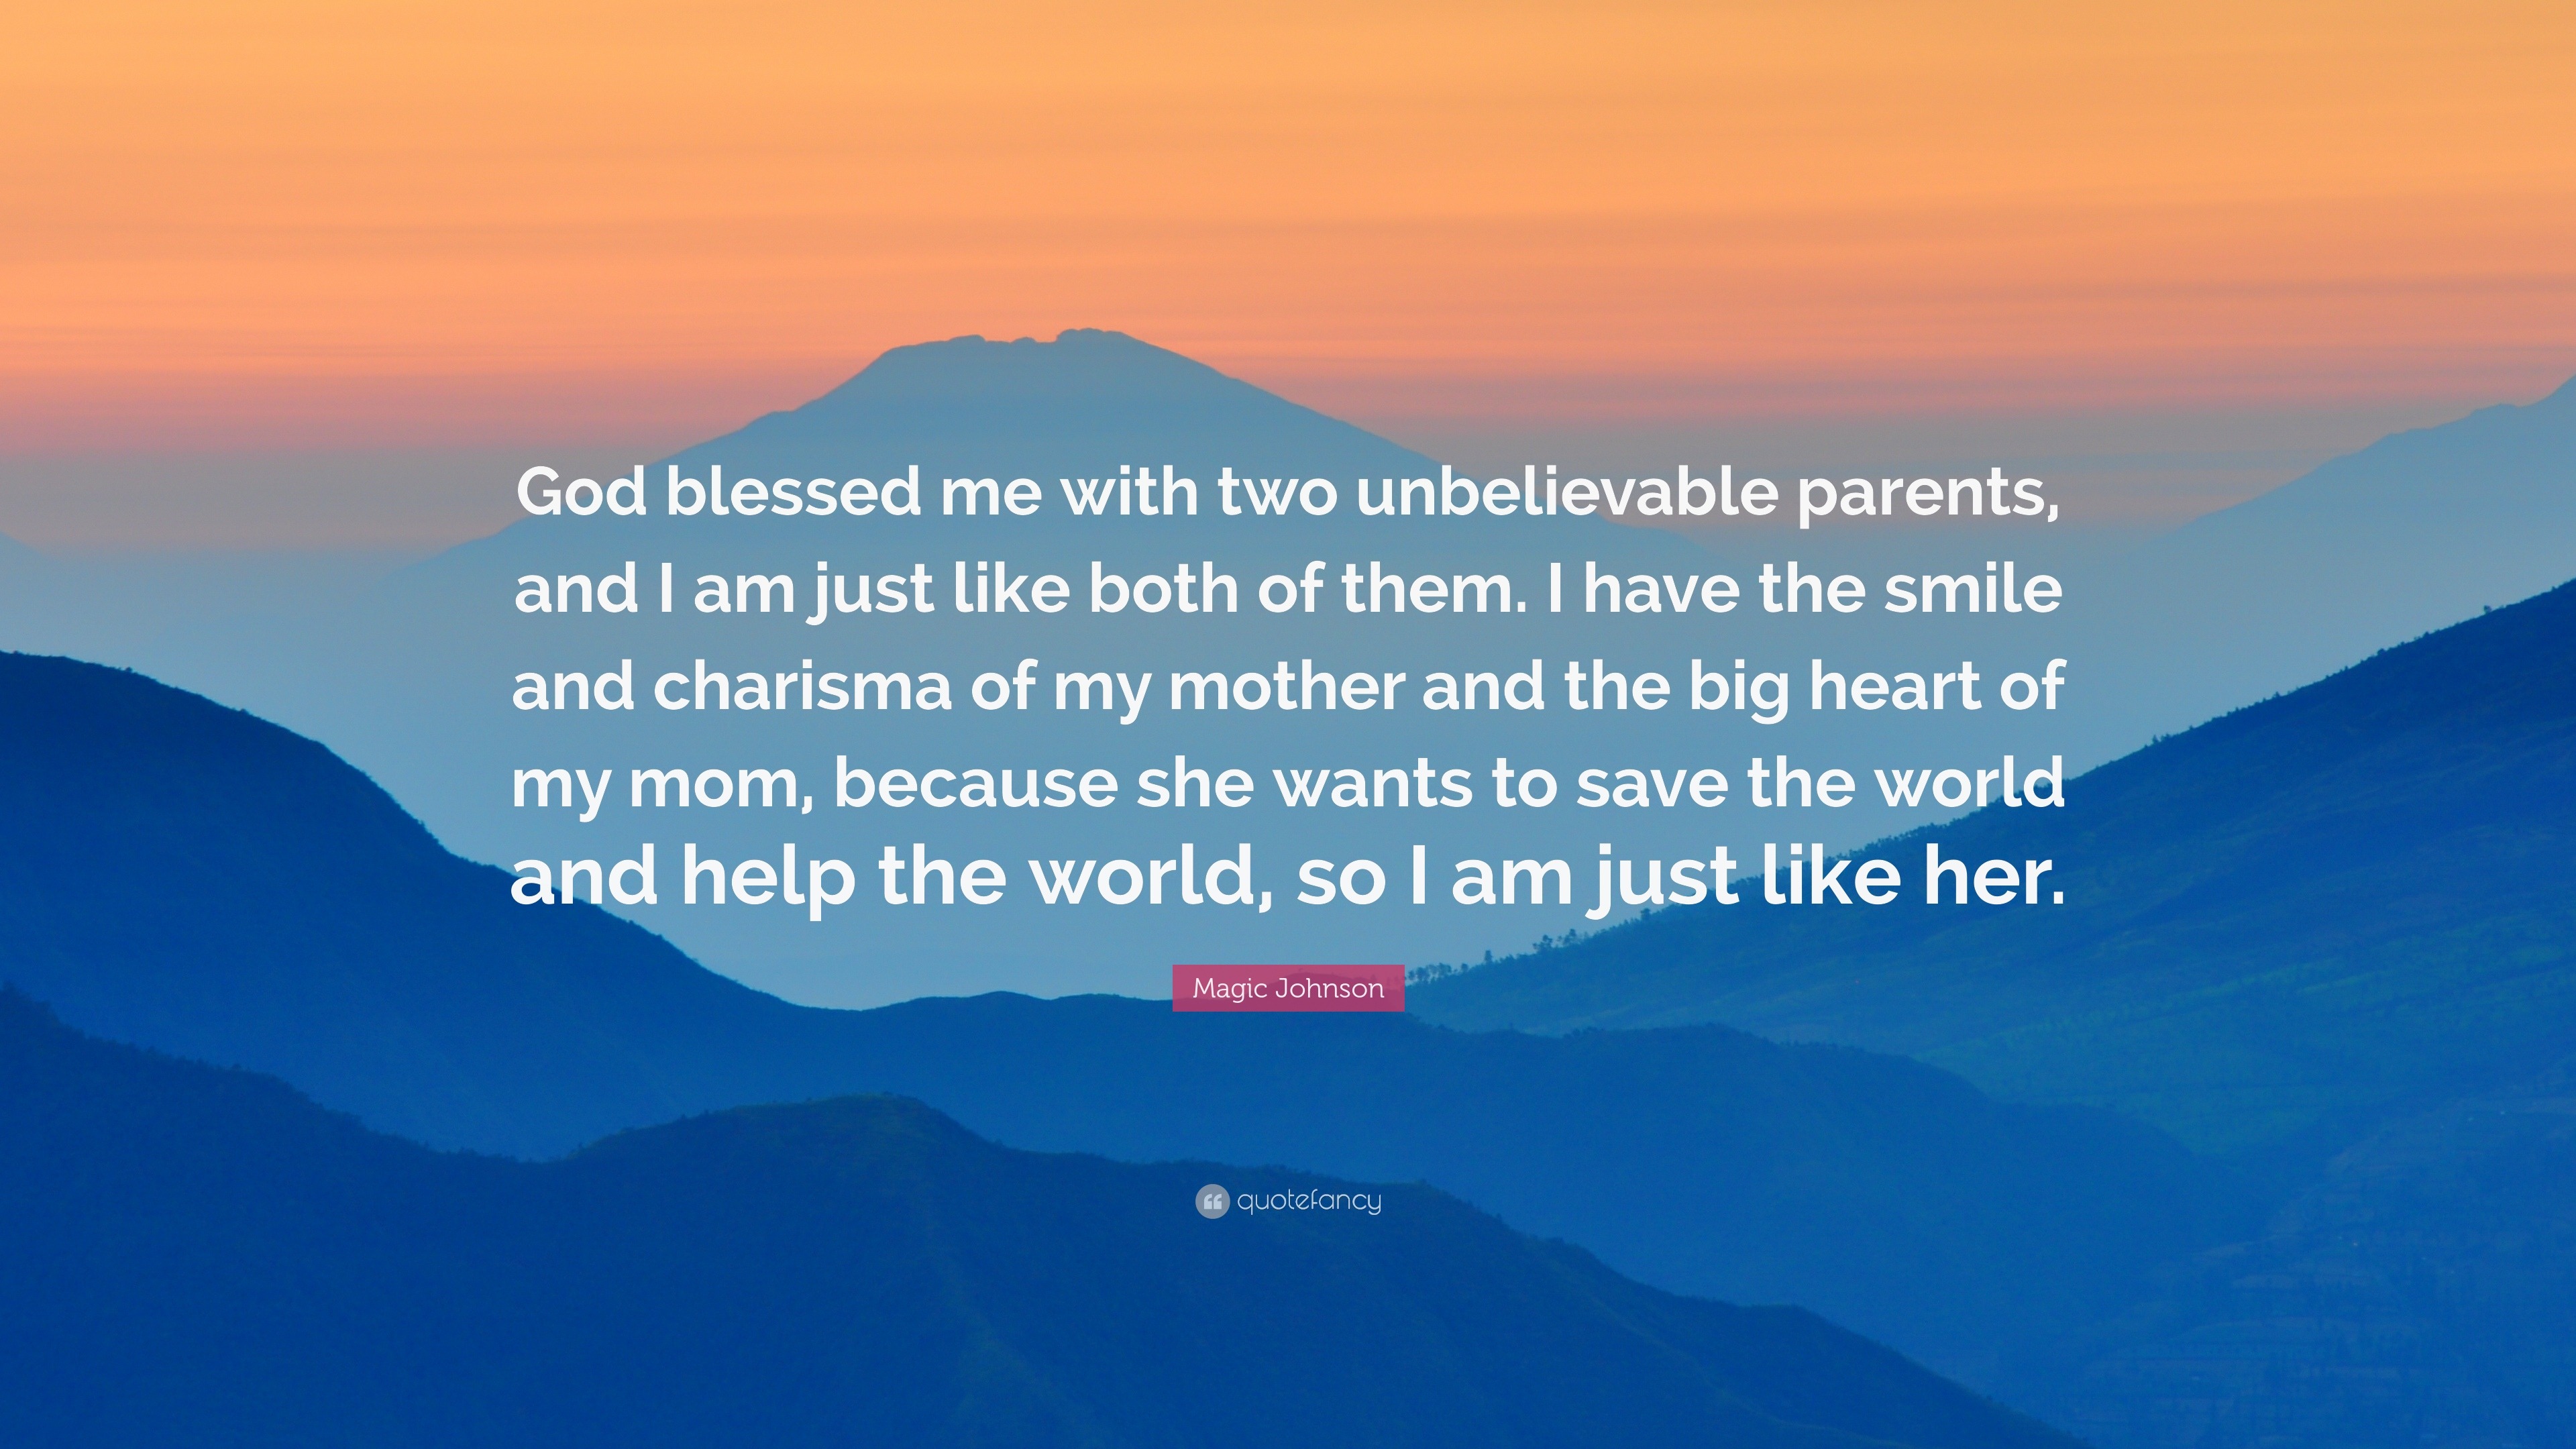 Magic Johnson Quote God Blessed Me With Two Unbelievable Parents Images, Photos, Reviews